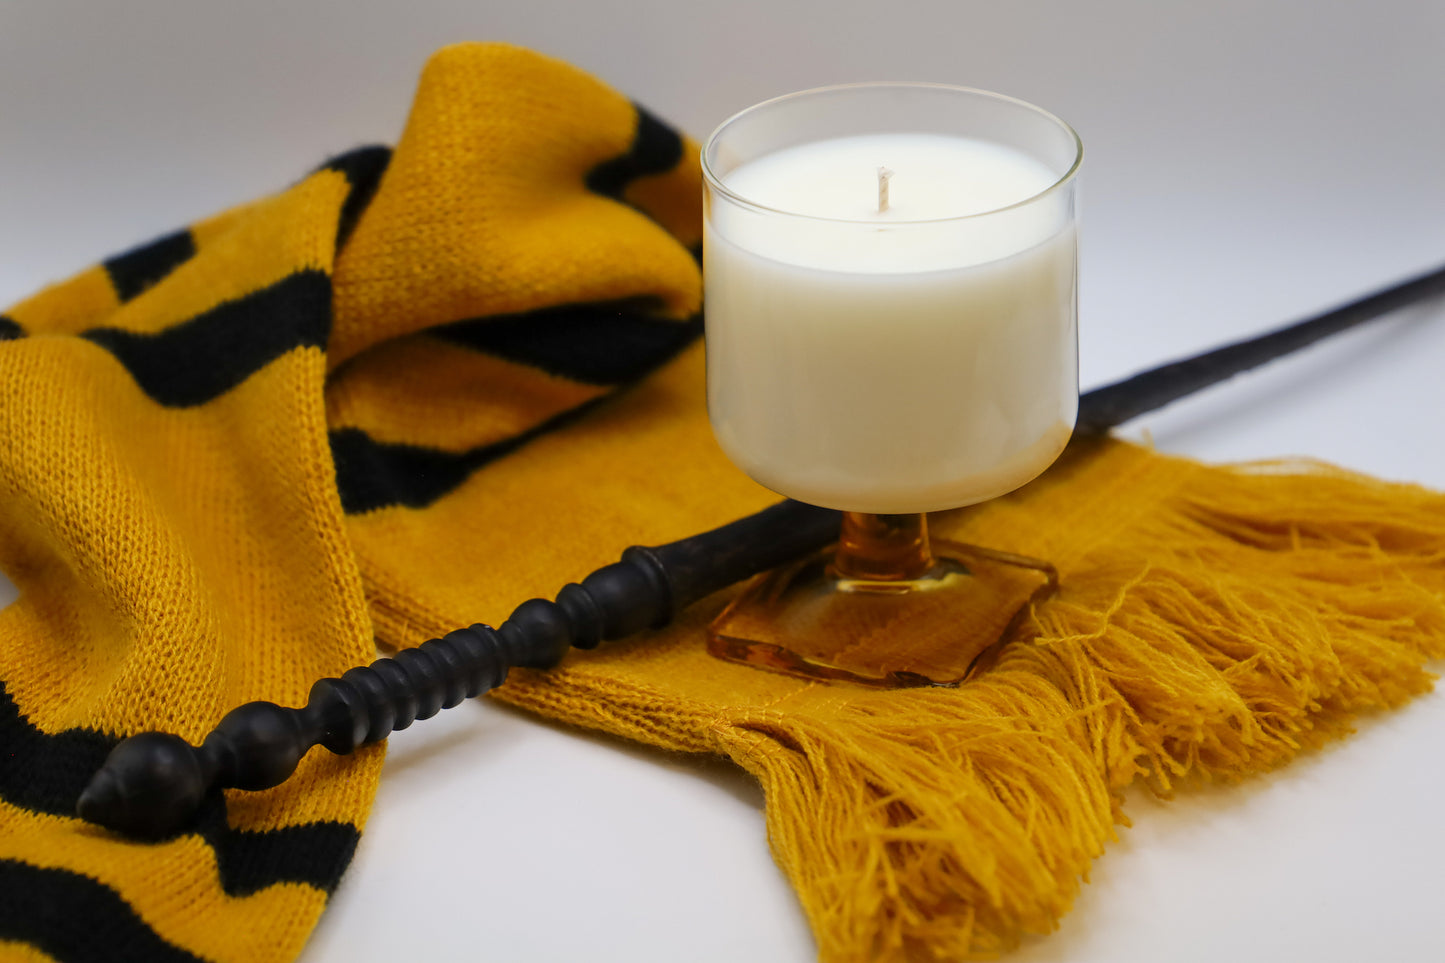 Nordic Topaz Glass with amber stem, Milk & Honey scented soy candle.